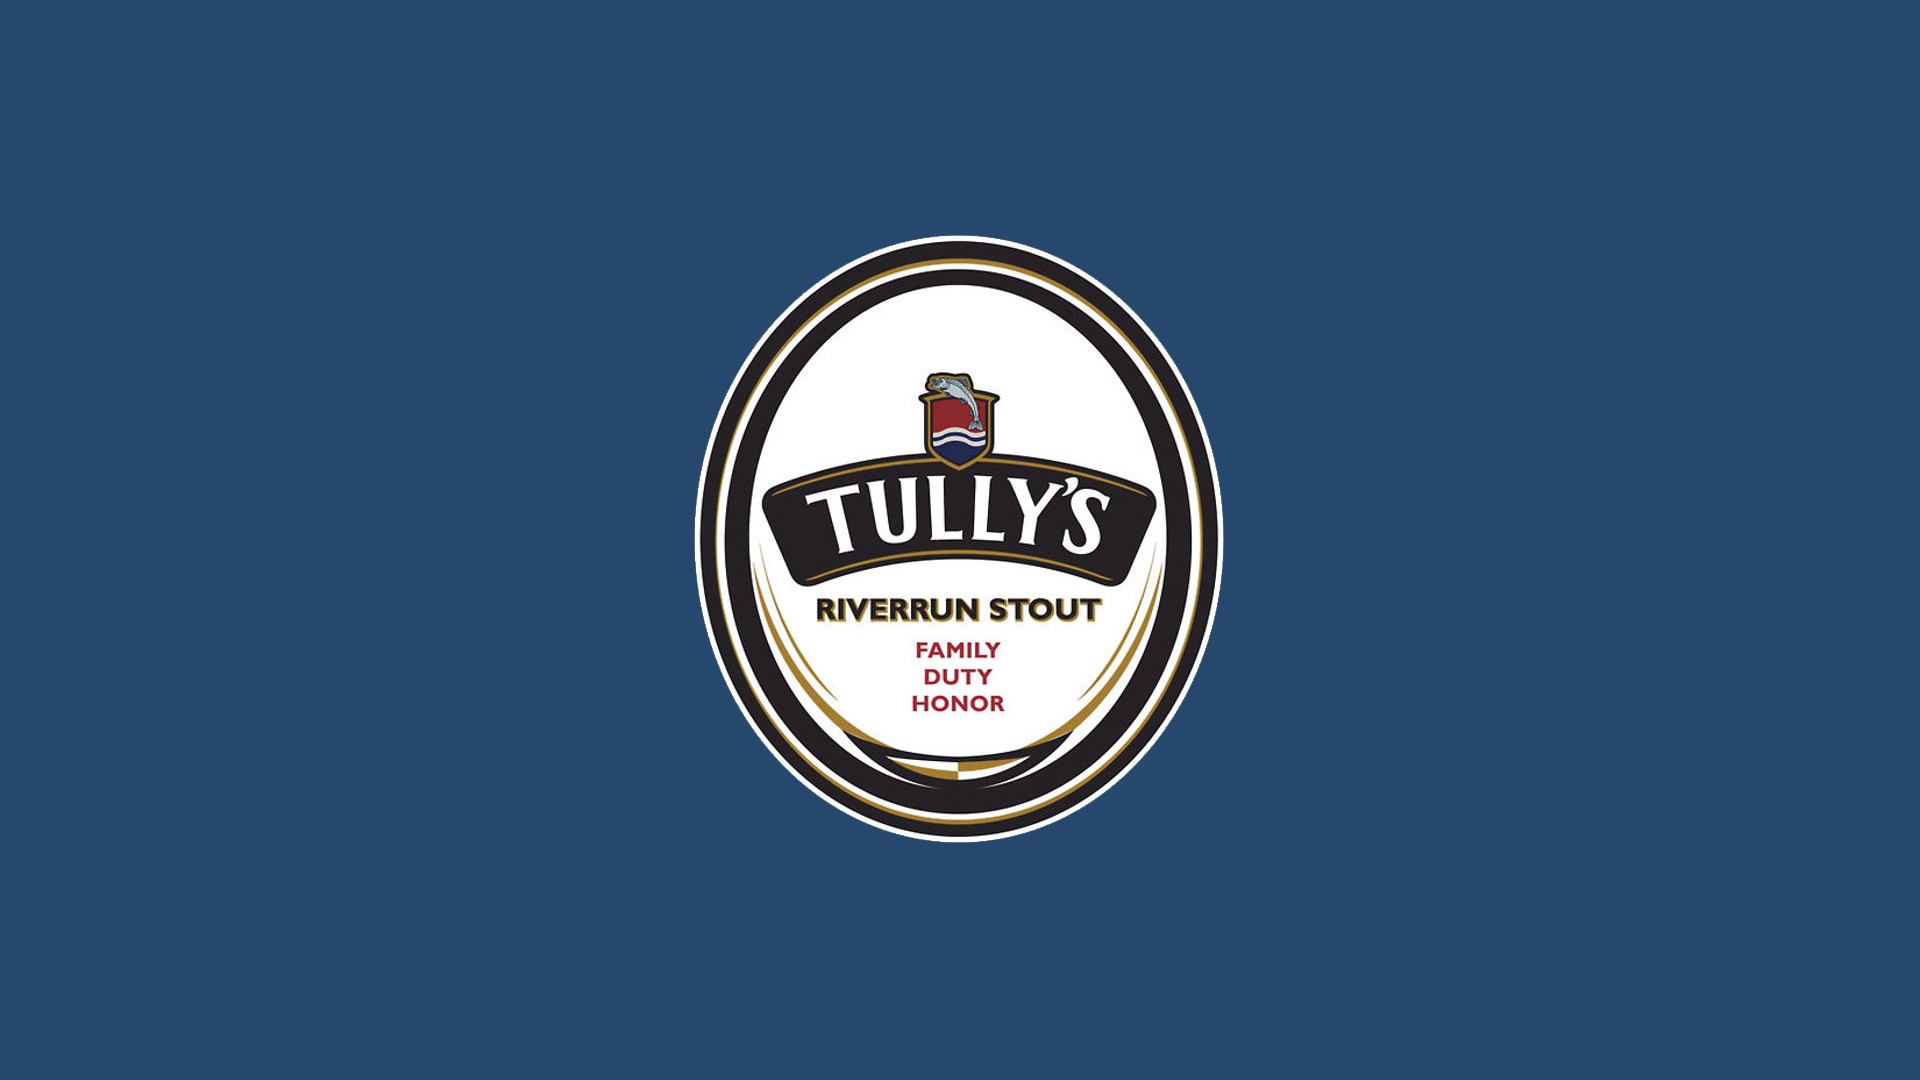 Game of Thrones, A Song of Ice and Fire, House Tully, Beer Wallpaper